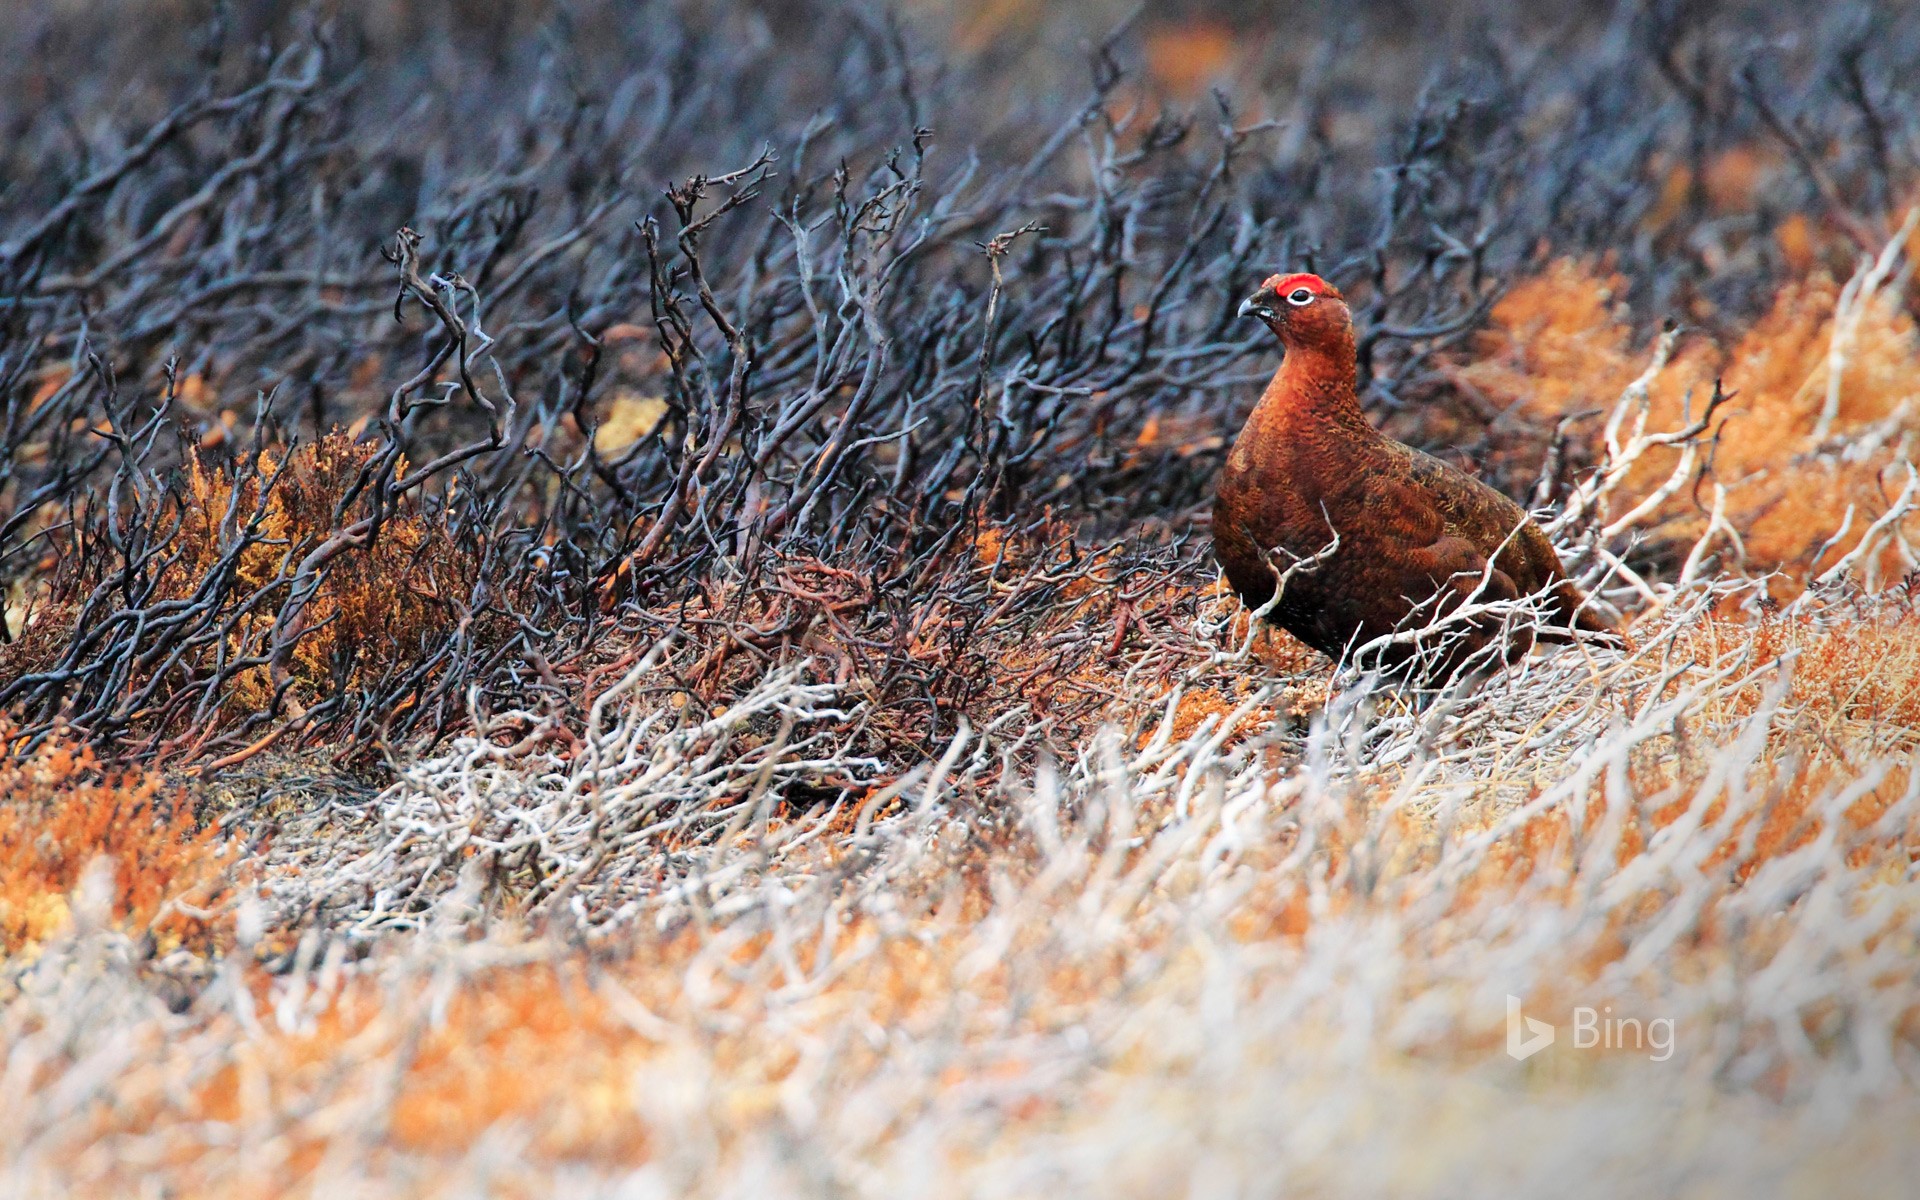 A red grouse at Cairngorms National Park, Scotland